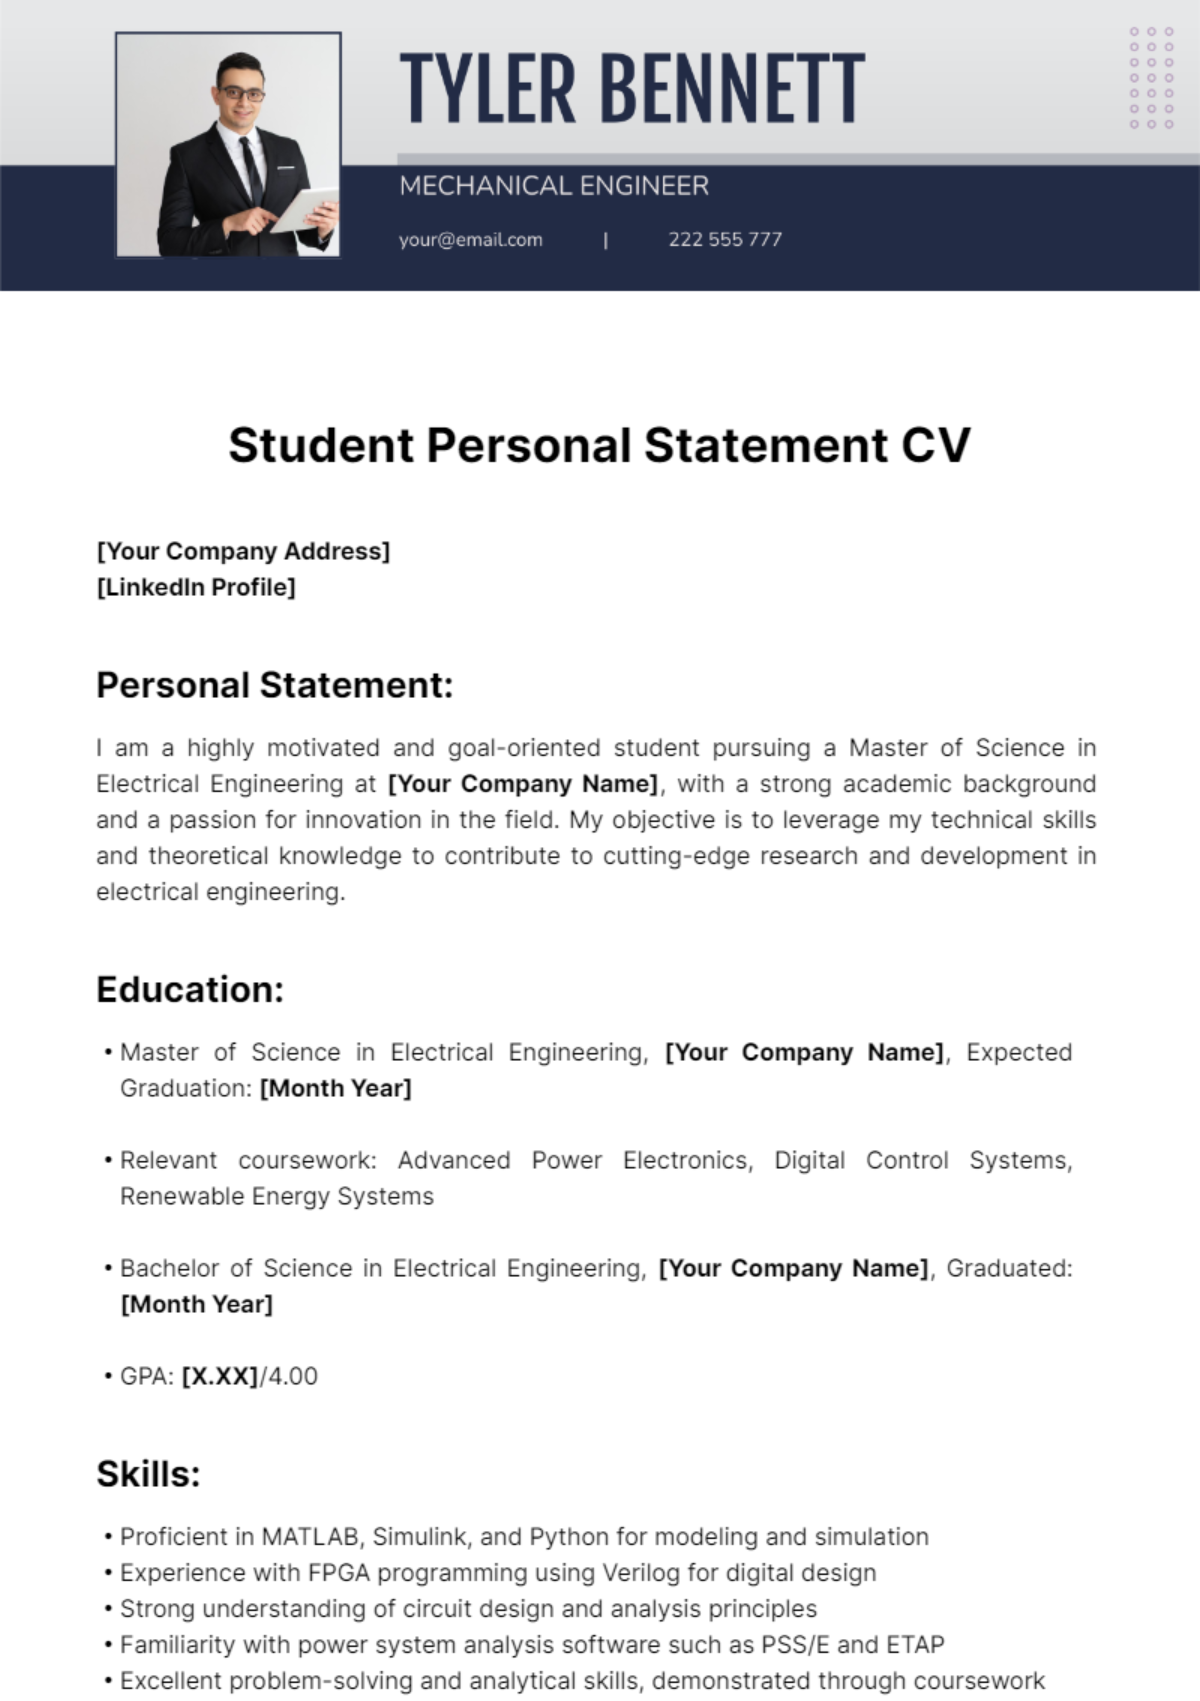 Student Personal Statement CV Template